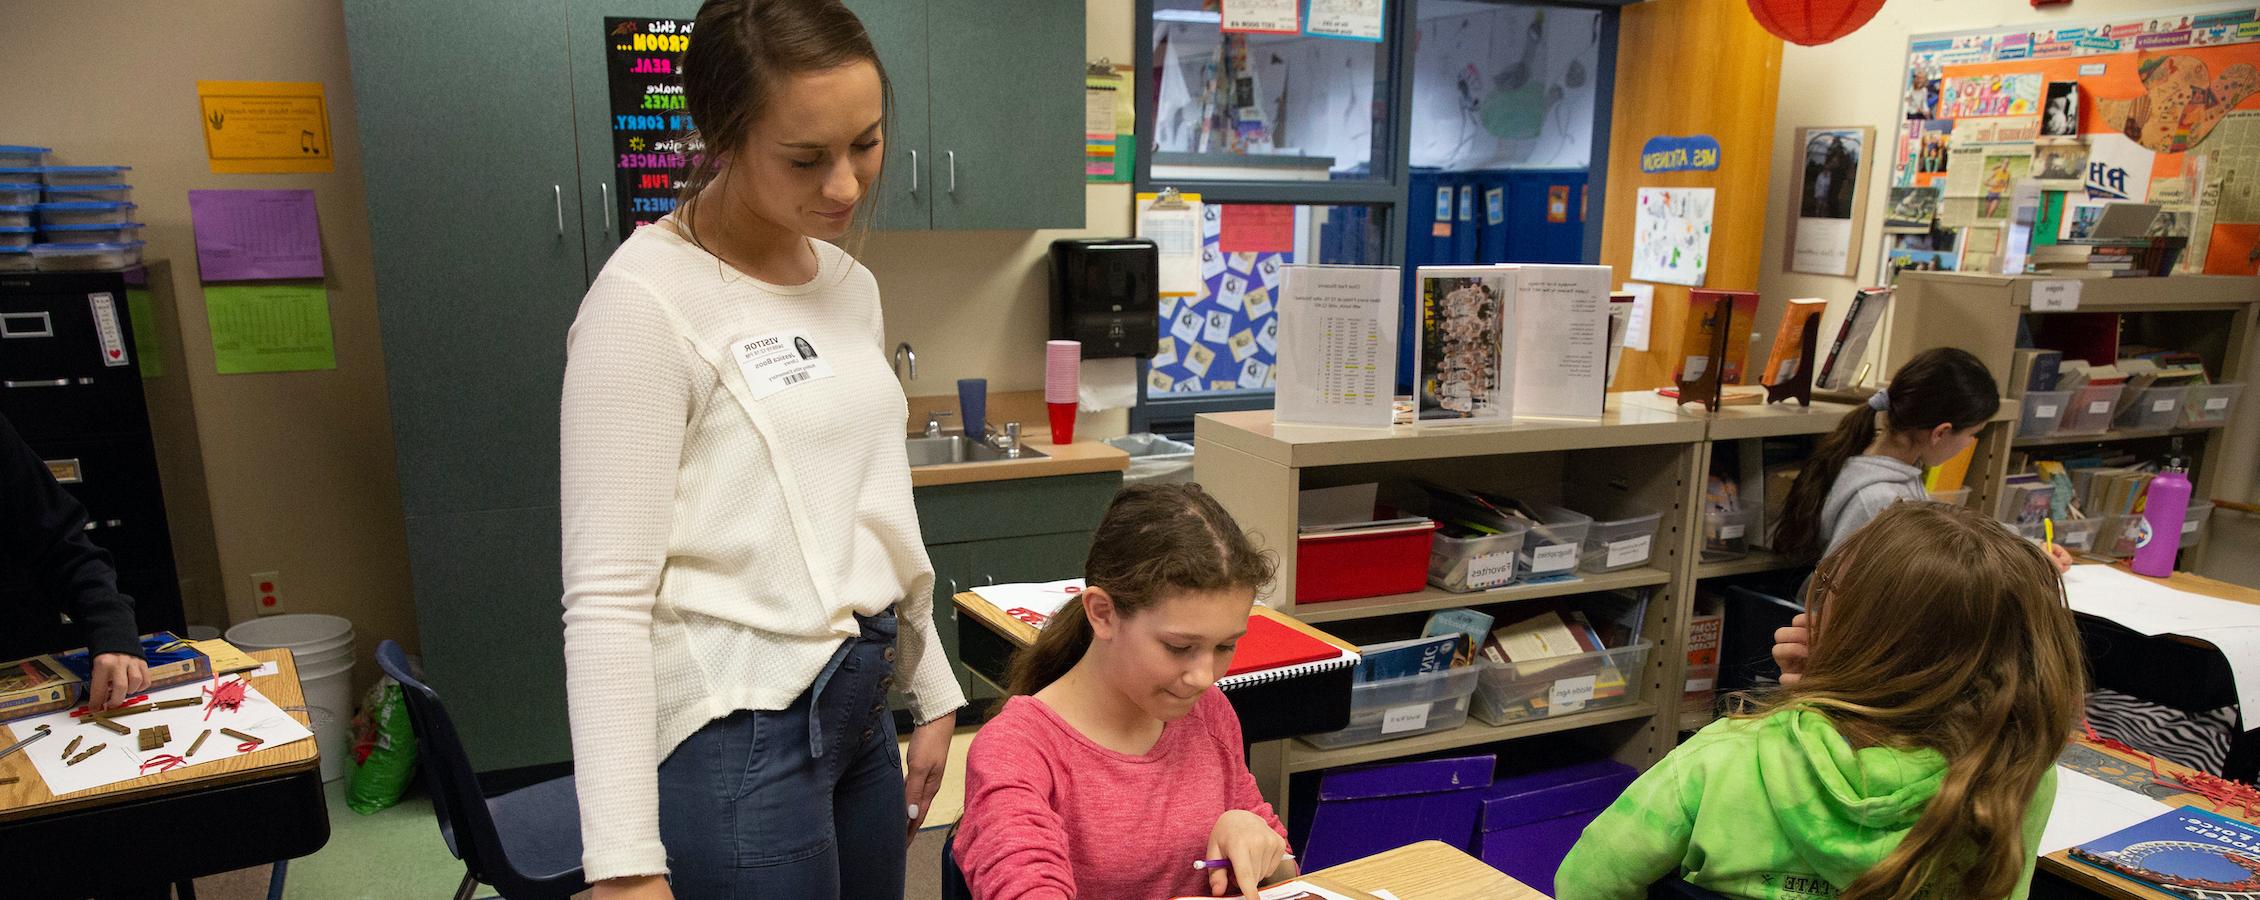 Education student Jessica Boos works on a science lesson with elementary school children.